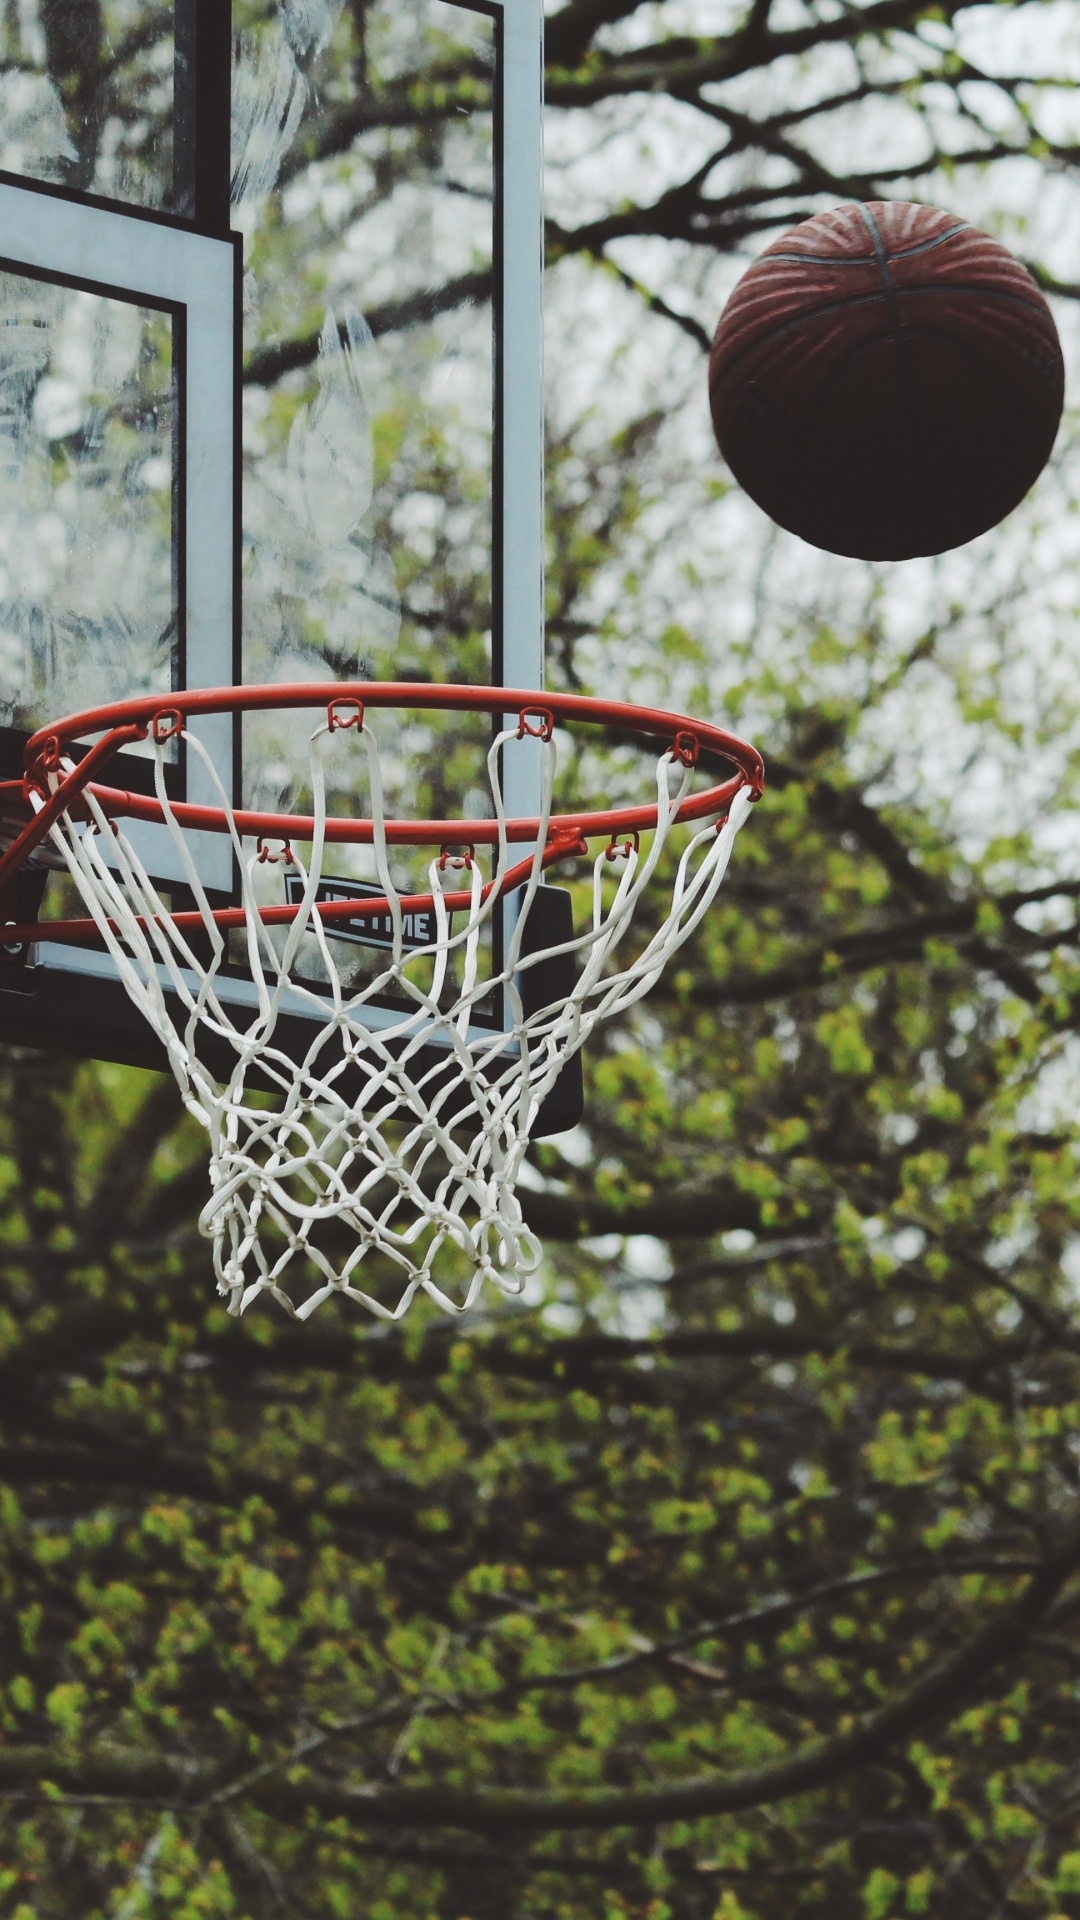 White and Red Basketball Hoop. Wallpaper in 1080x1920 Resolution